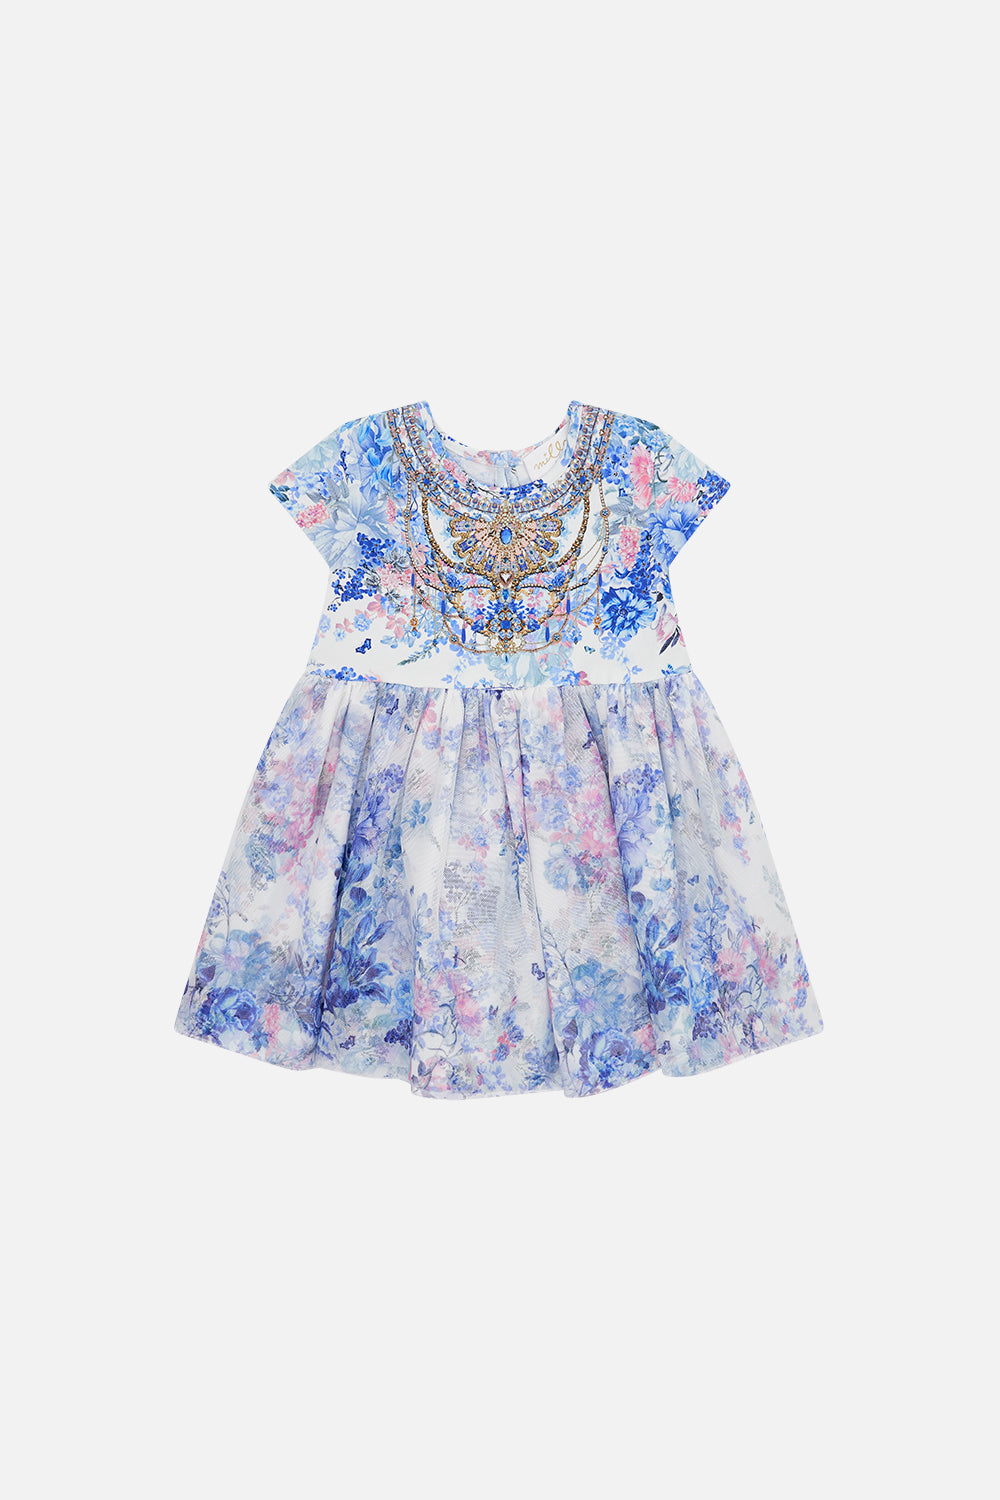 Product view of MILLA BY CAMILLA girls blue floral dress in Tuscan Moondance print